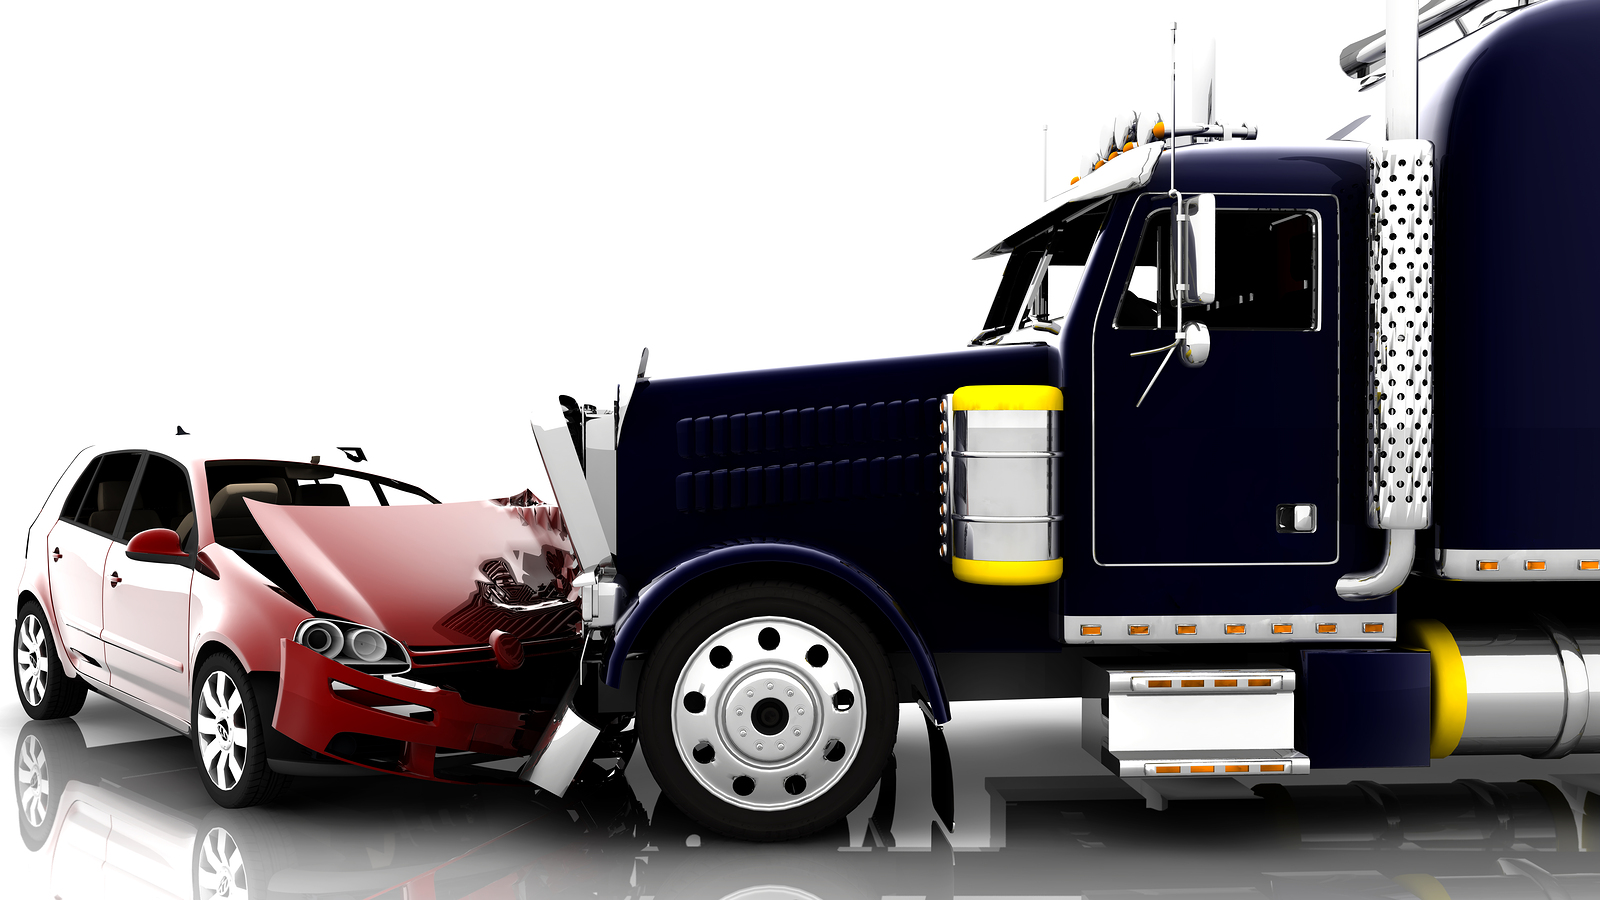 Truck accident-attorney | How to avoid truck accidents